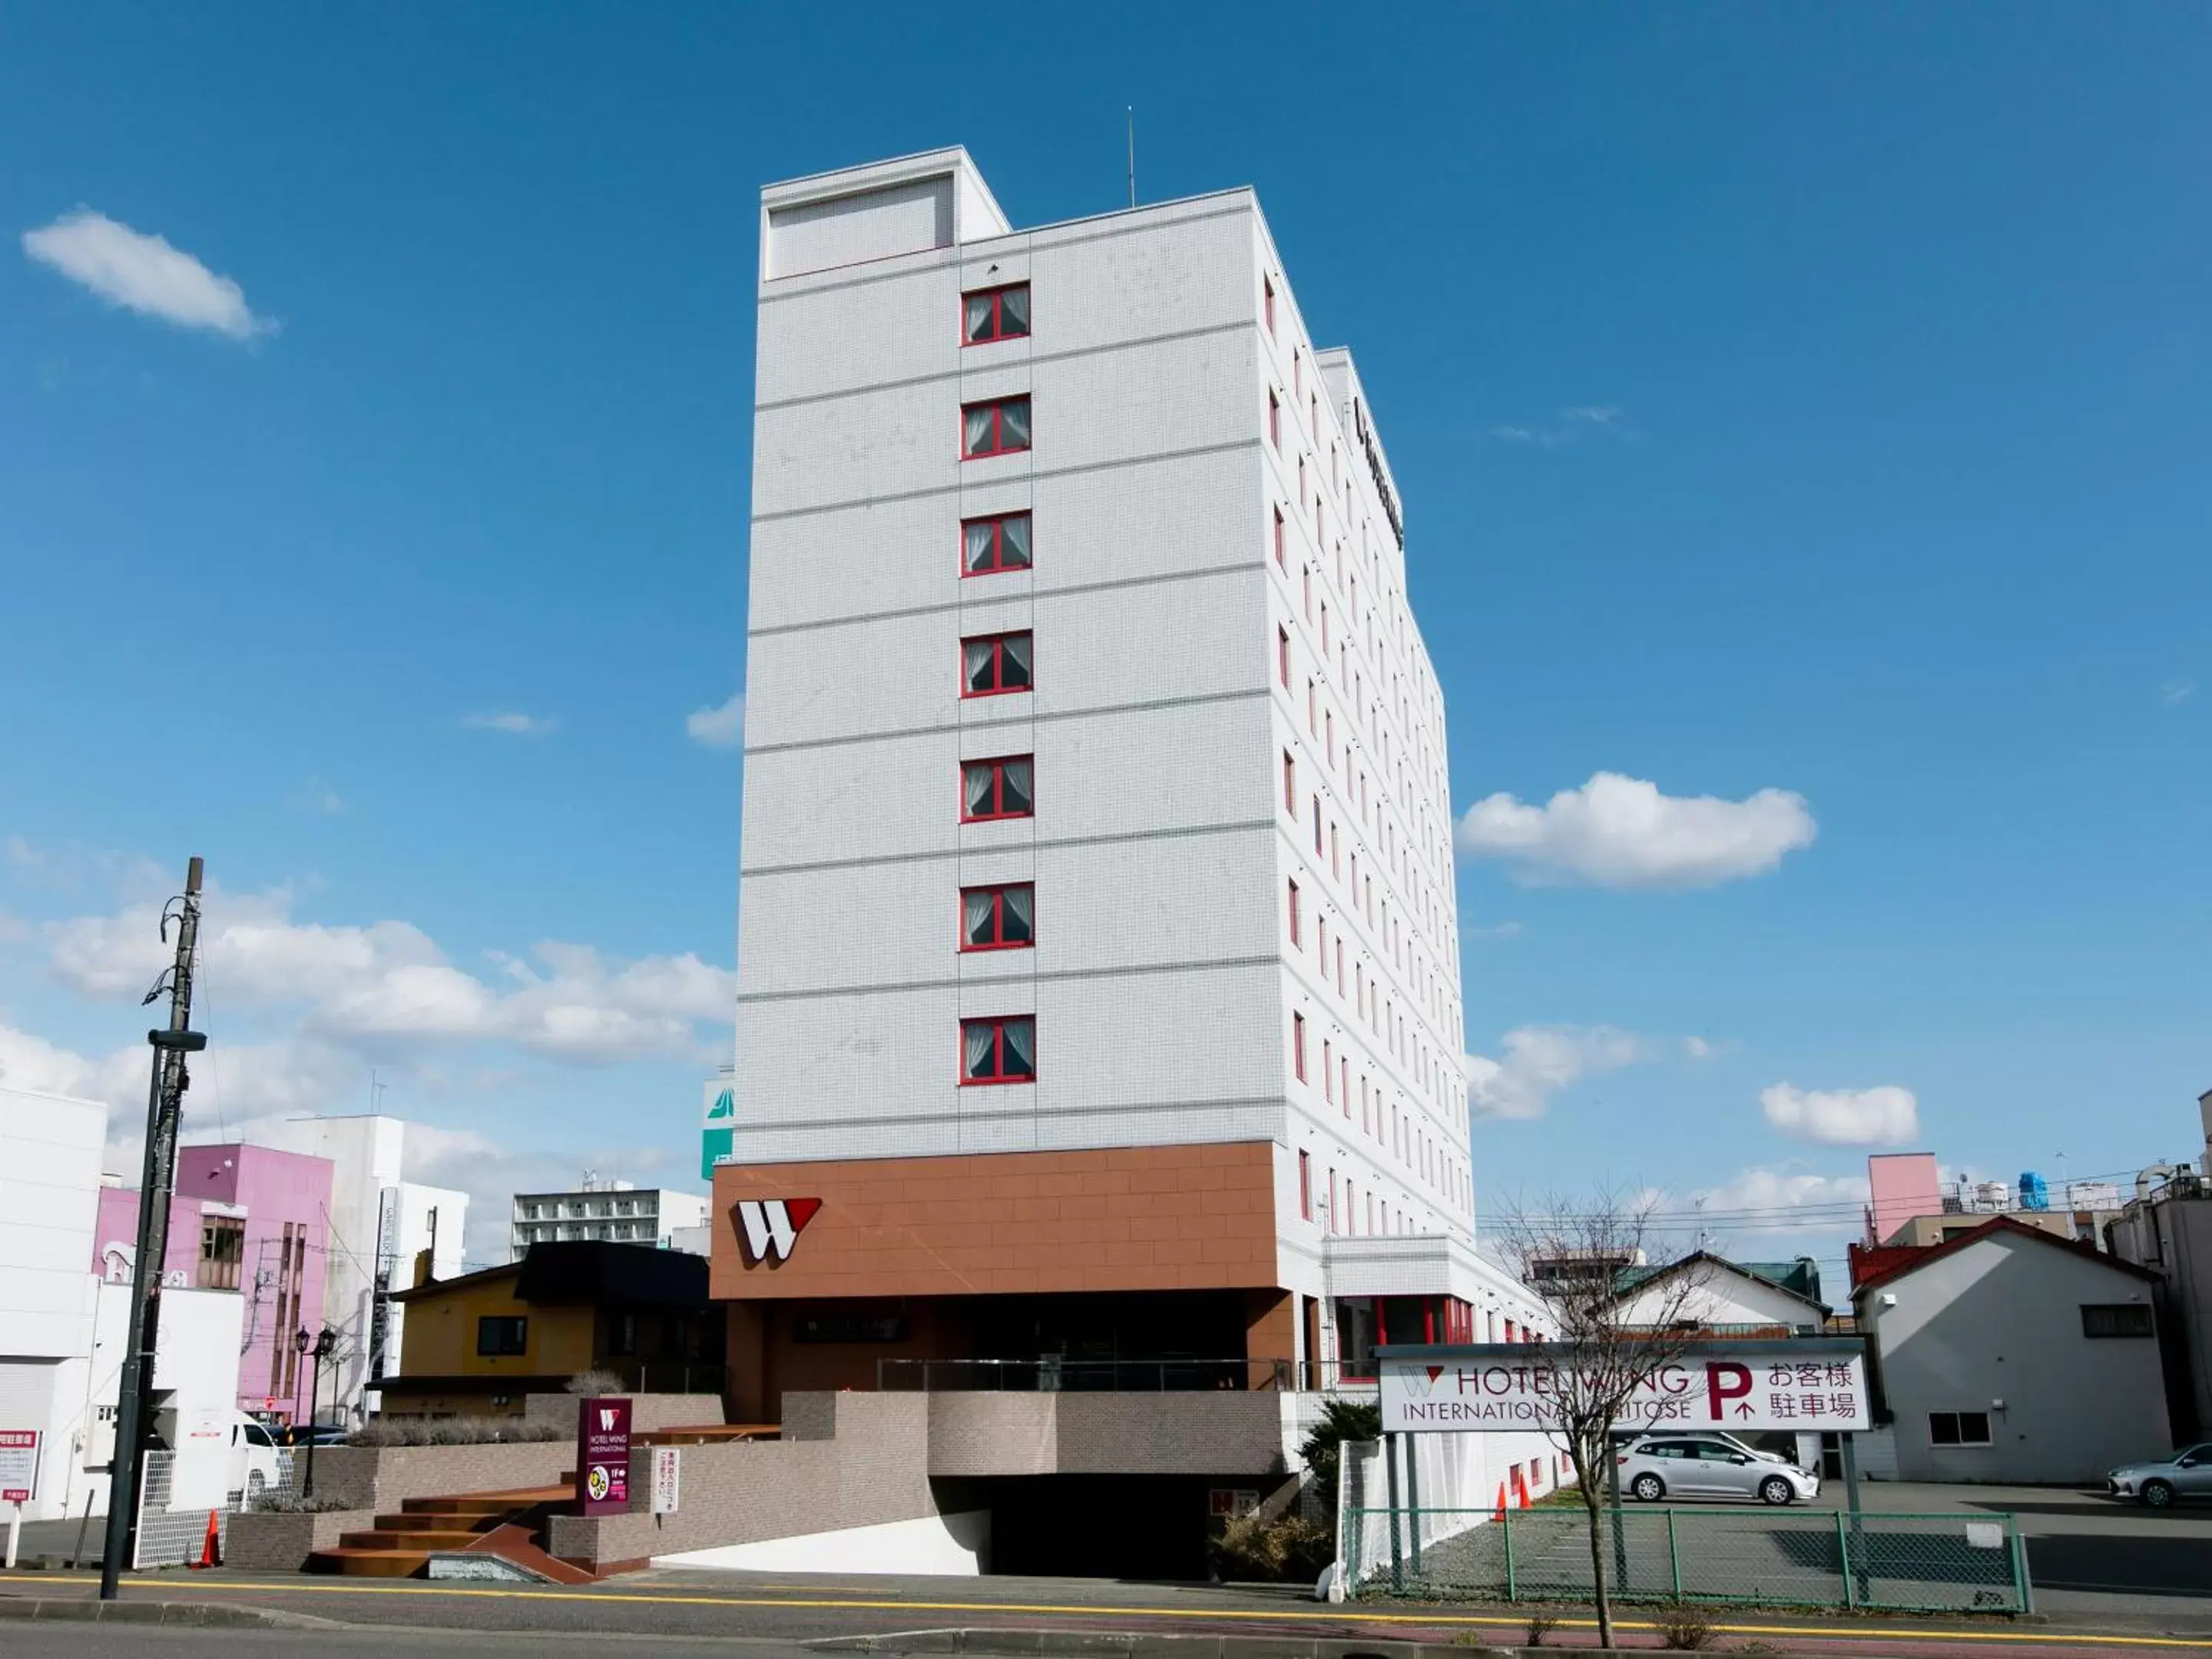 Property Building in Hotel Wing International Chitose